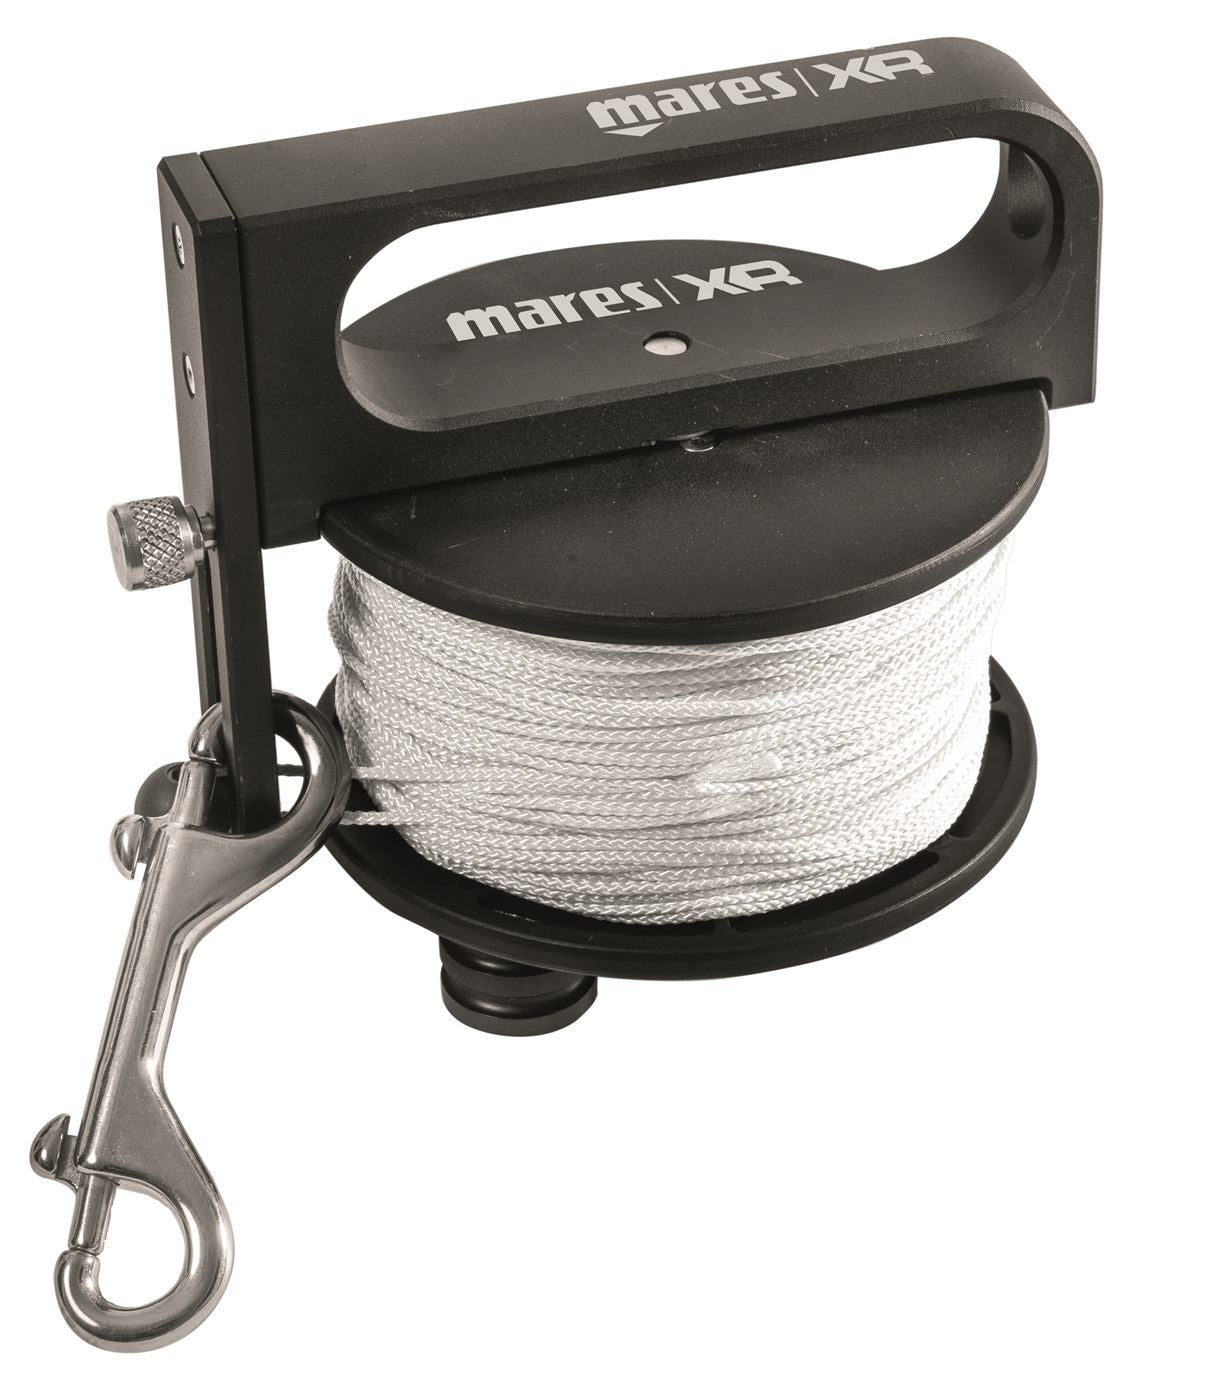 DSMB REEL OR FINGER SPOOL, Whats the difference between DSMB Reels and  Spools, SCUBA DIVING